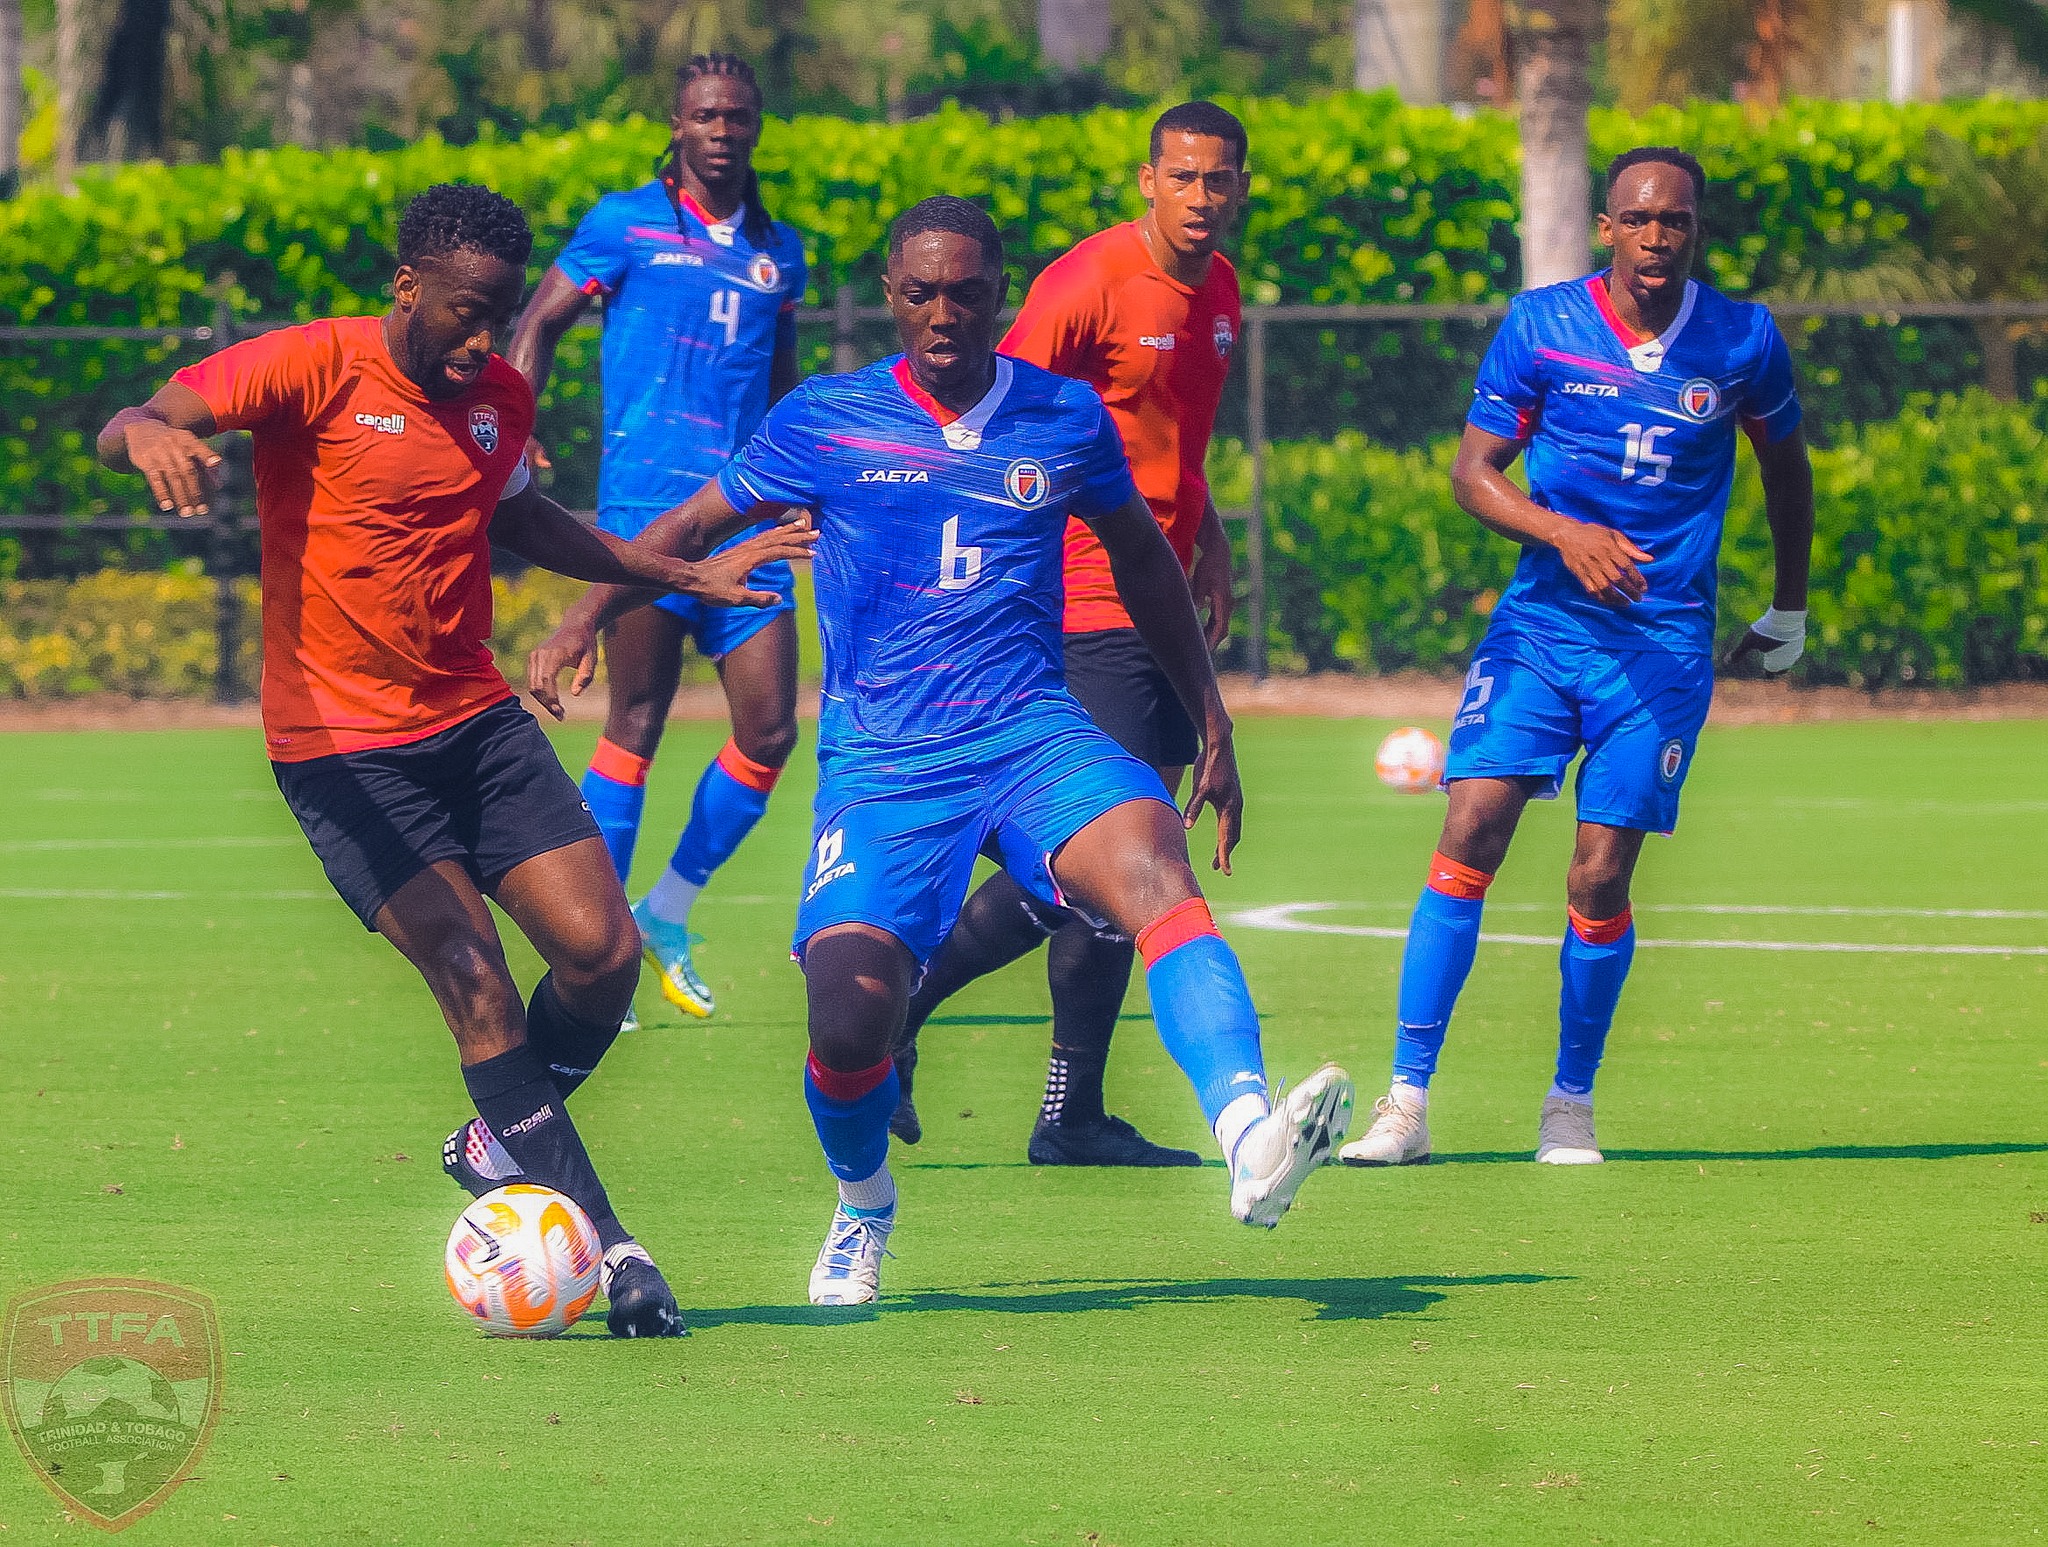 T&T play Haiti to 0-0 scoreline in Gold Cup match